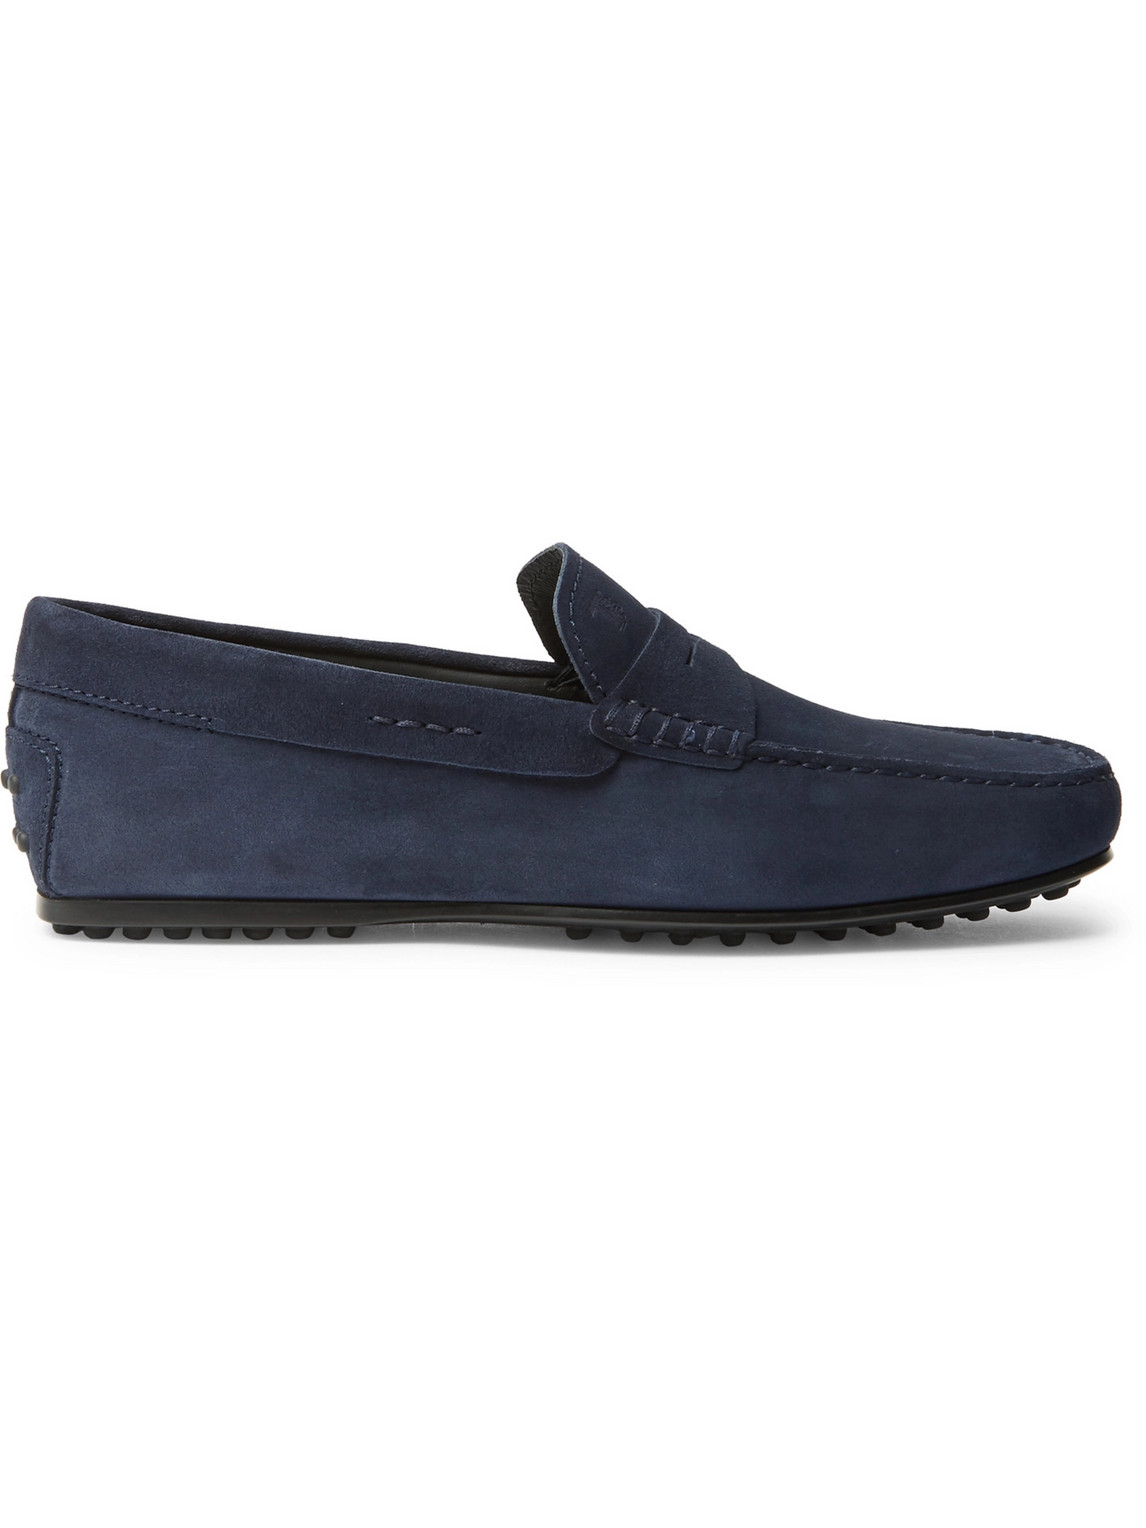 Tod's - Gommino Suede Driving Shoes - Men - Blue - UK 9.5 von Tod's